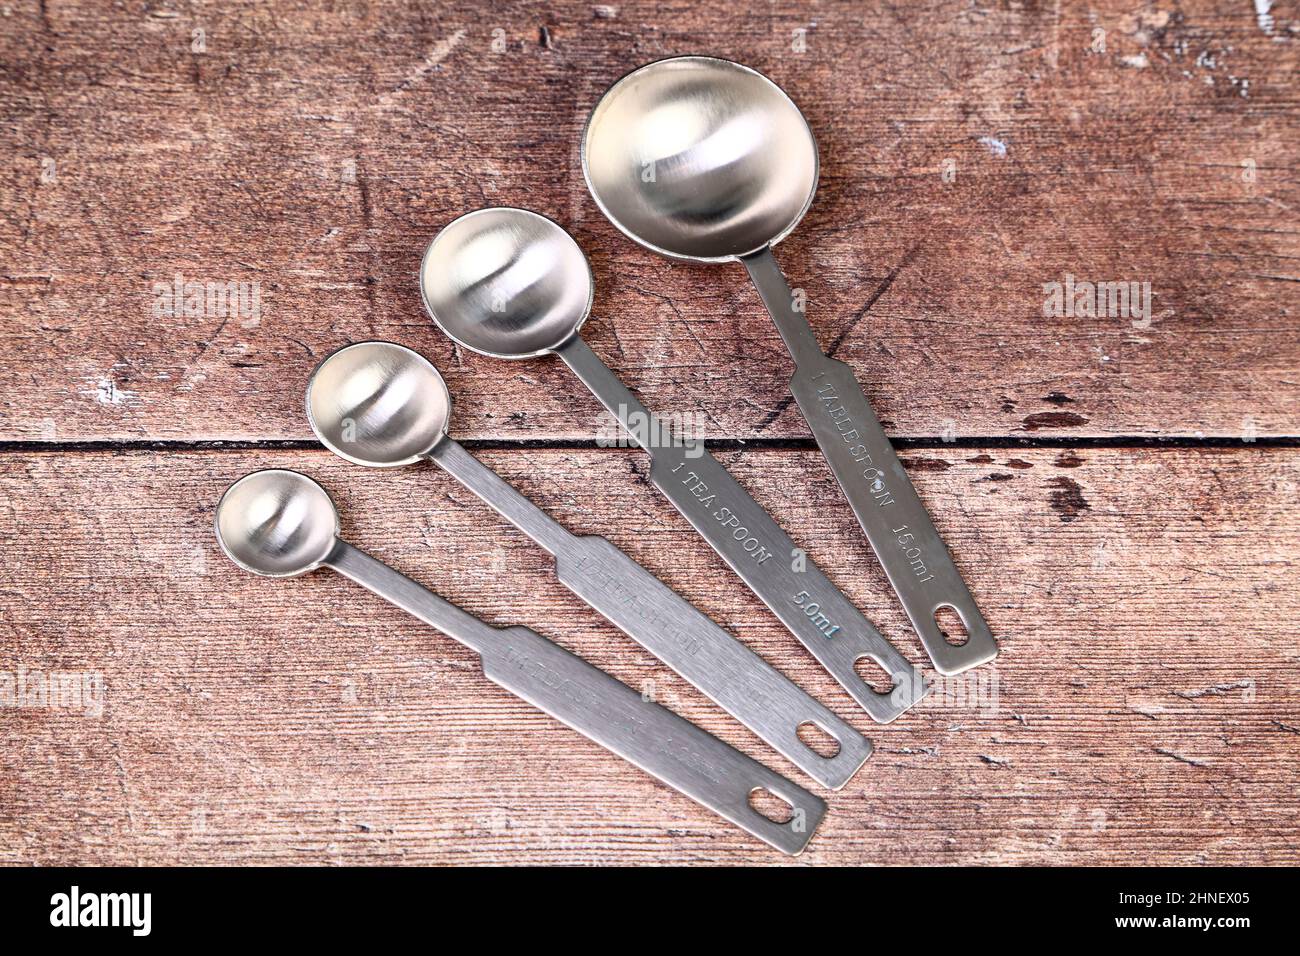 https://c8.alamy.com/comp/2HNEX05/wooden-kitchen-table-with-a-set-of-stainless-steel-measuring-spoons-baking-concept-2HNEX05.jpg